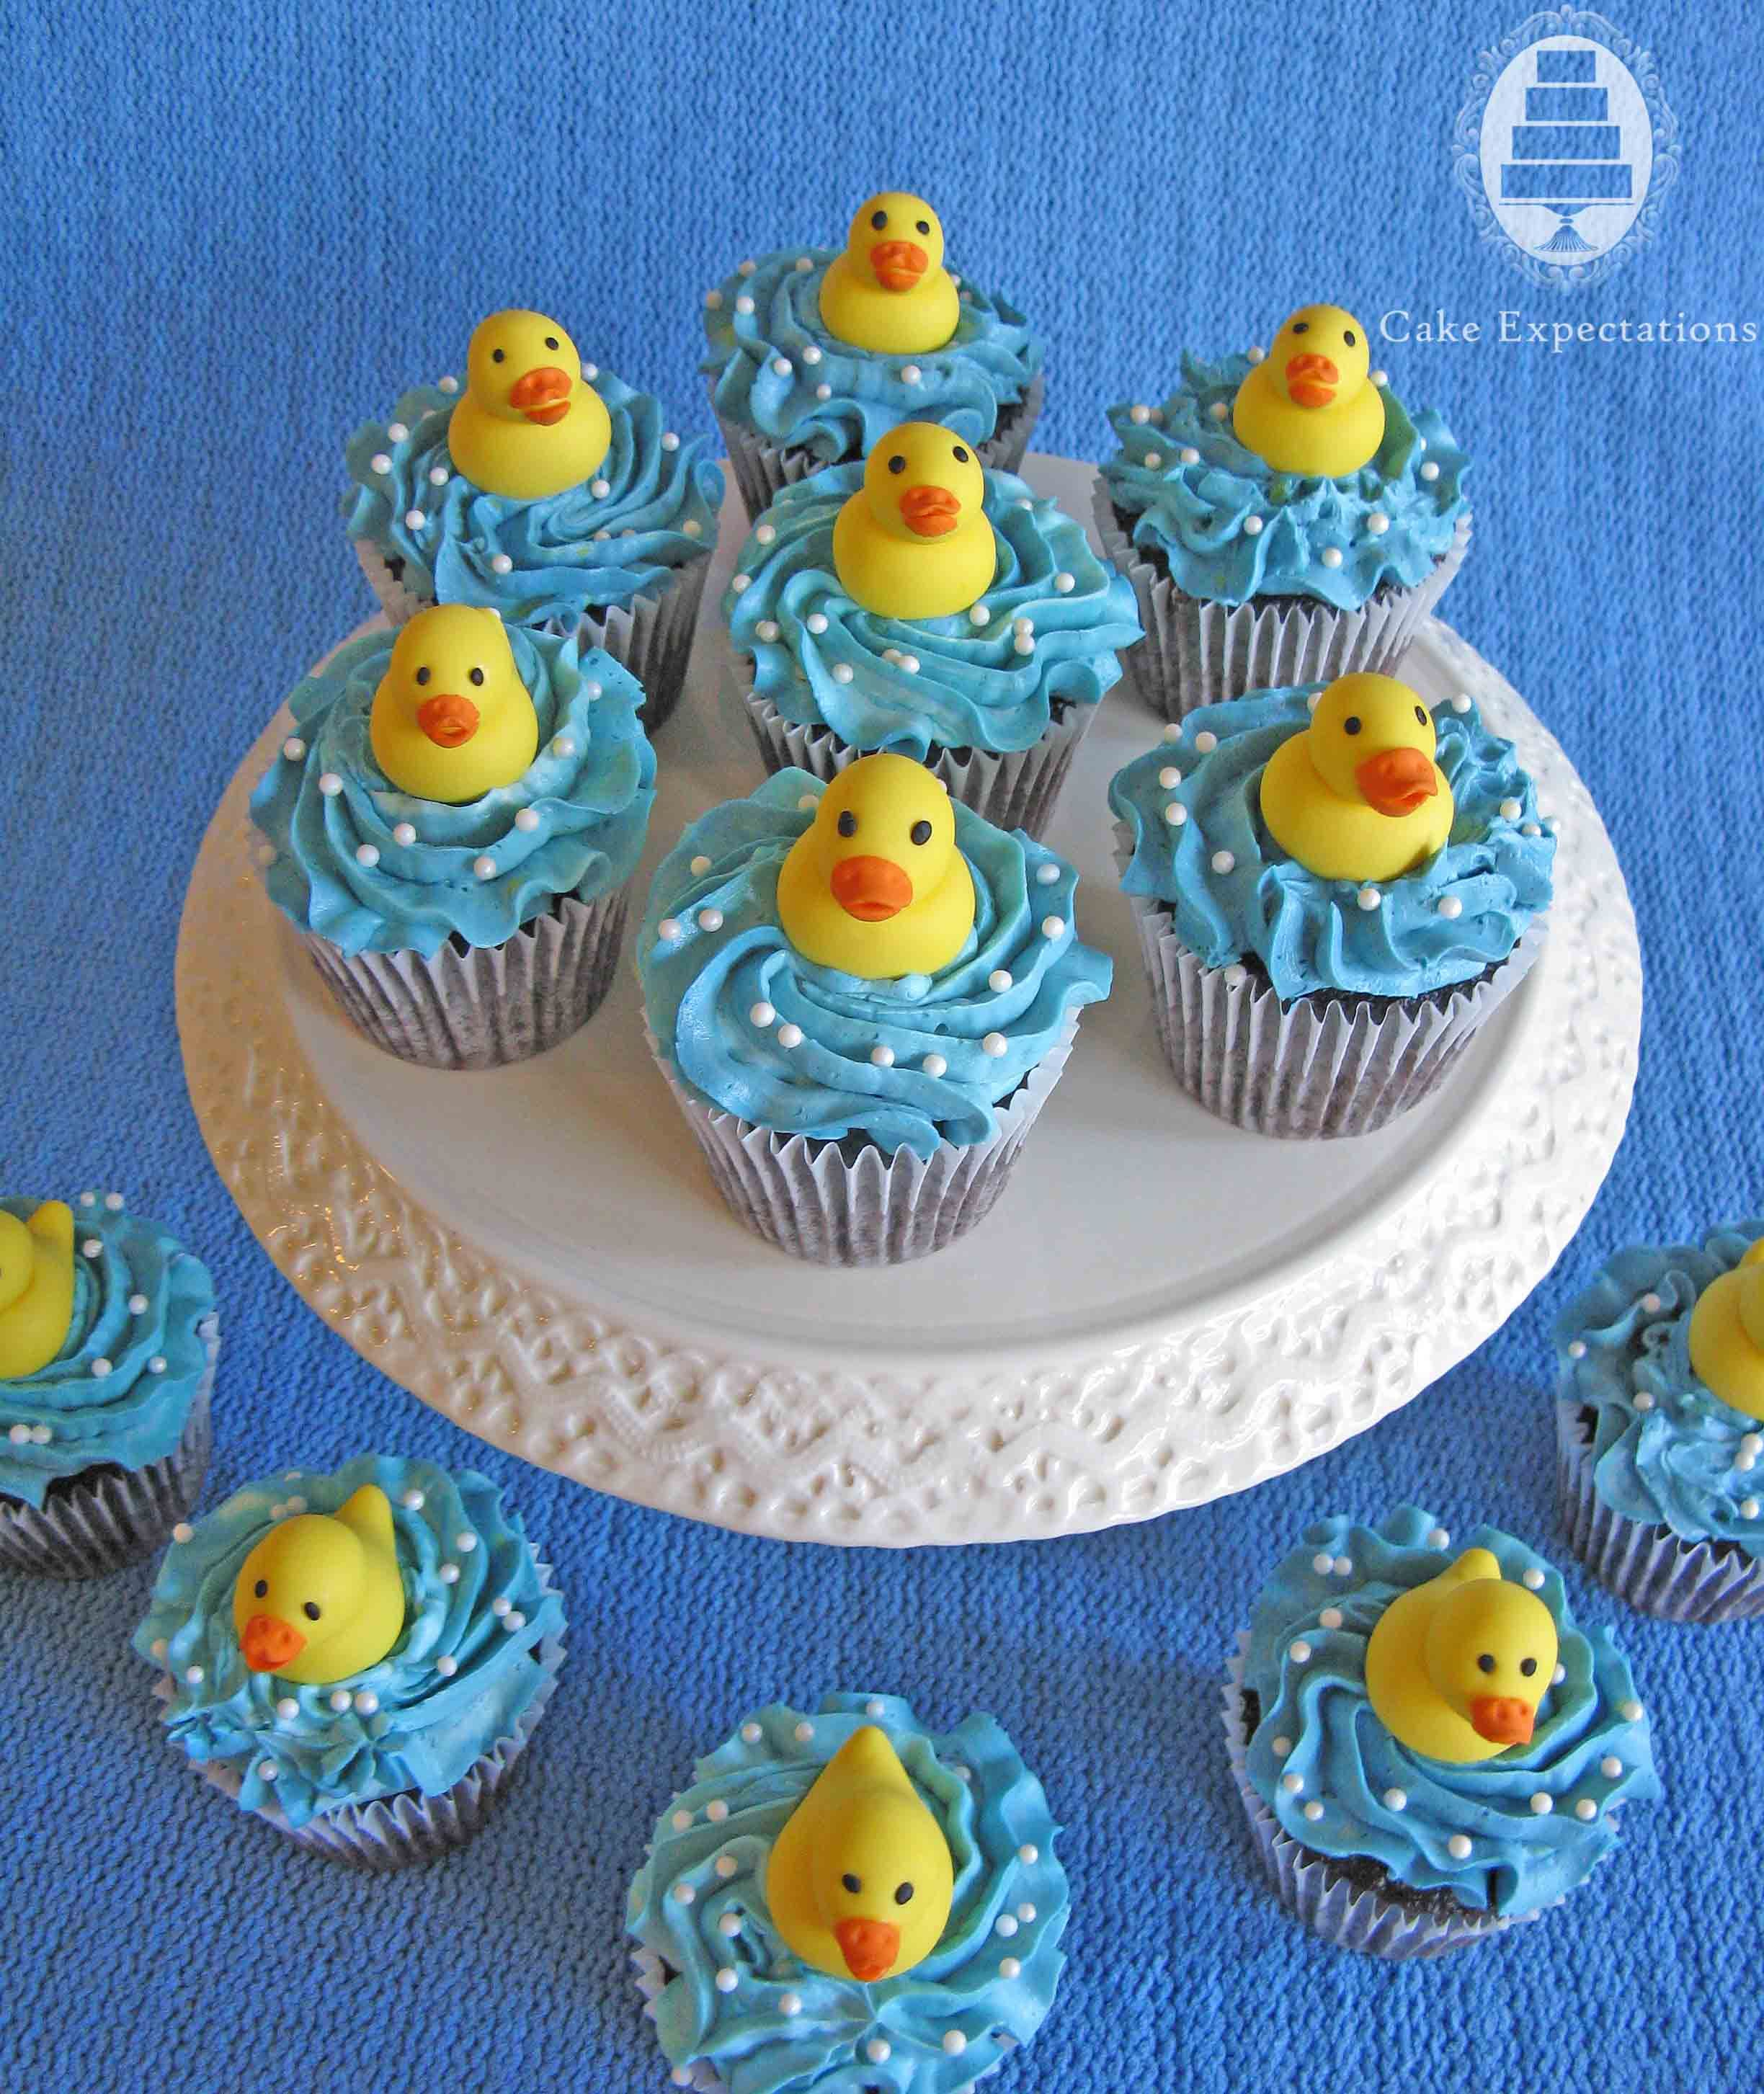 10 Fantastic Rubber Duckie Baby Shower Ideas image detail for rubber ducky baby shower cupcakes saturday june 2024